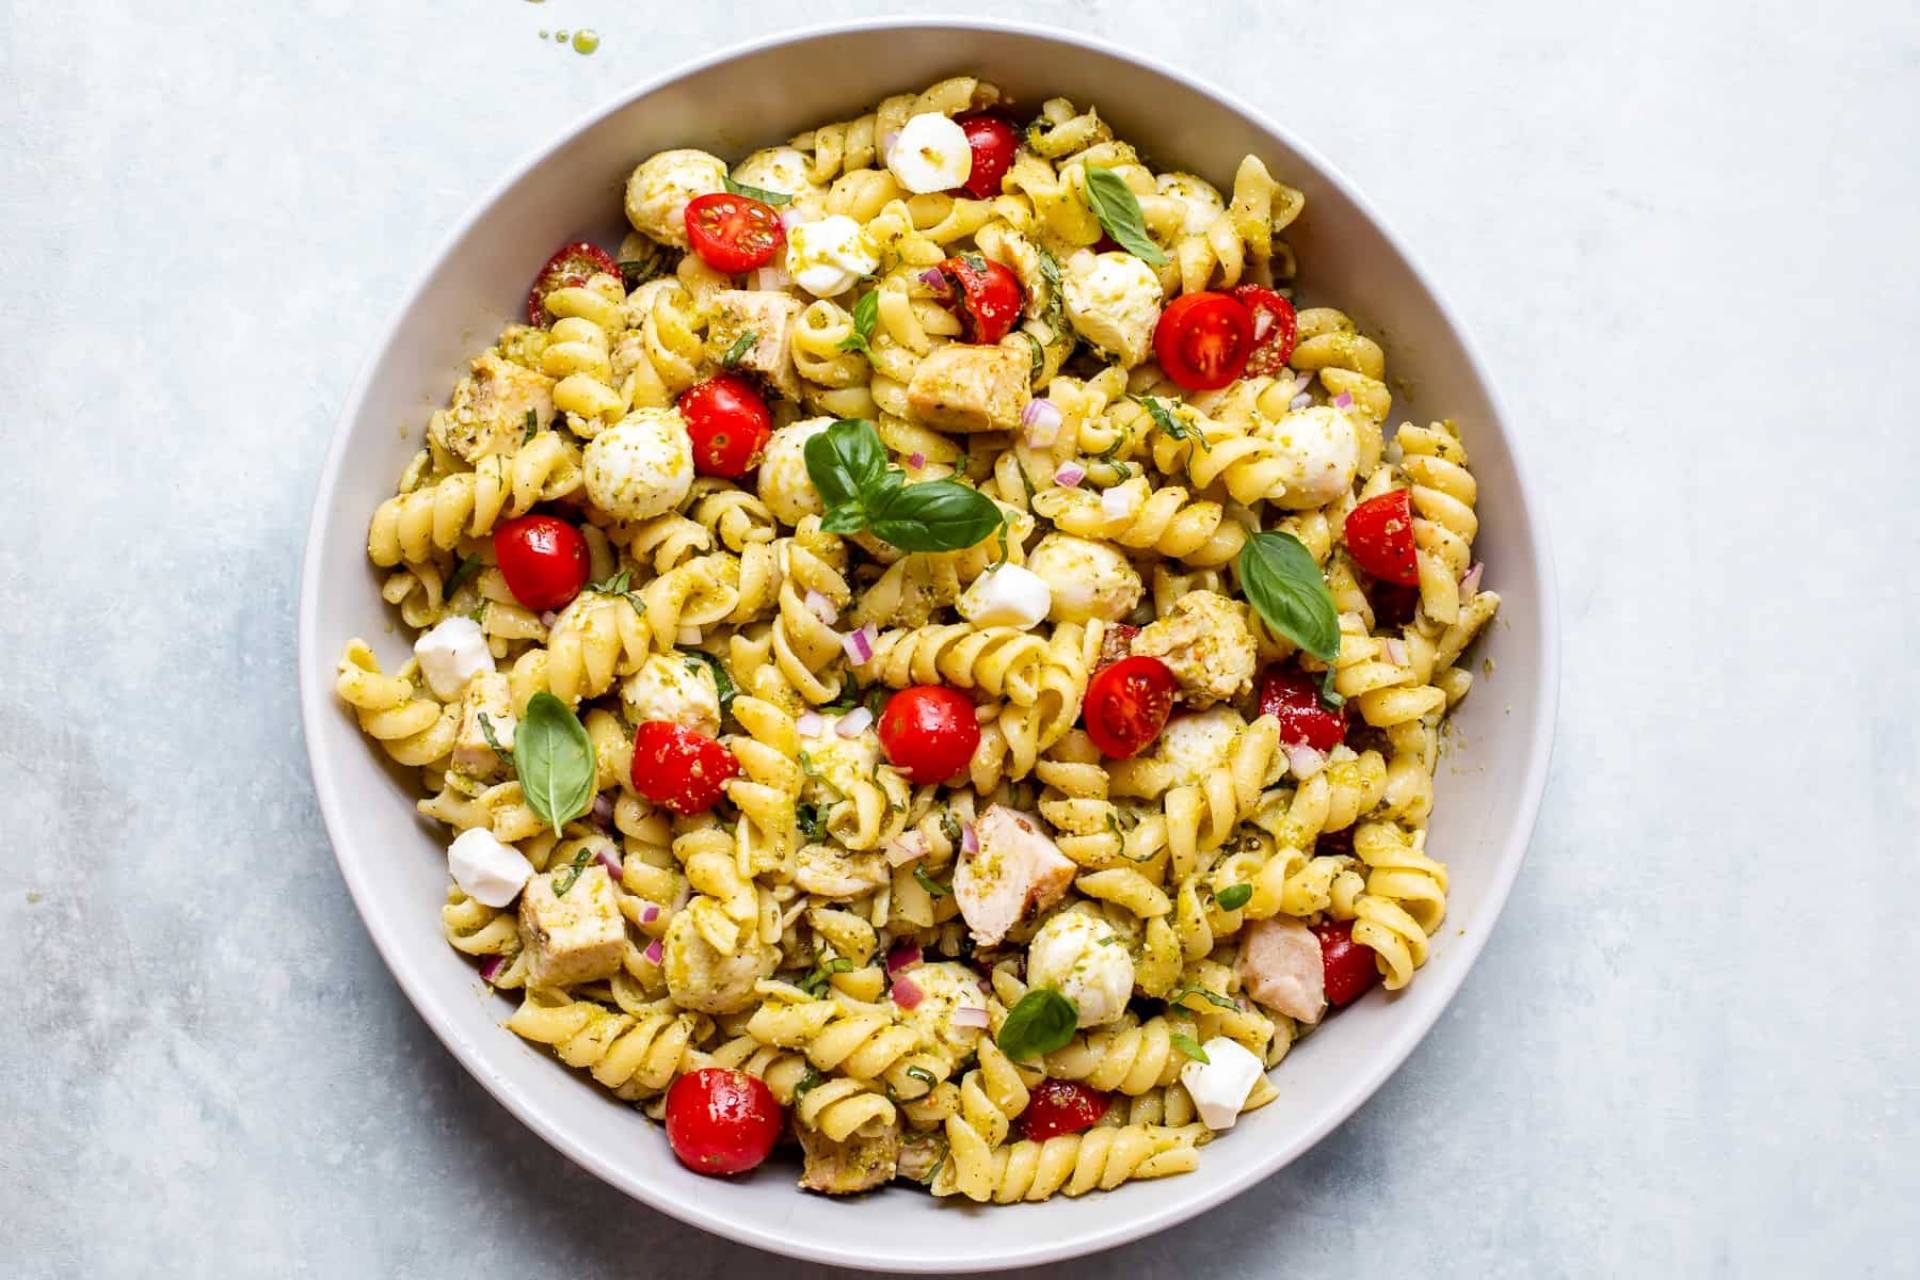 Grilled Chicken over Sundried Tomato Pasta salad